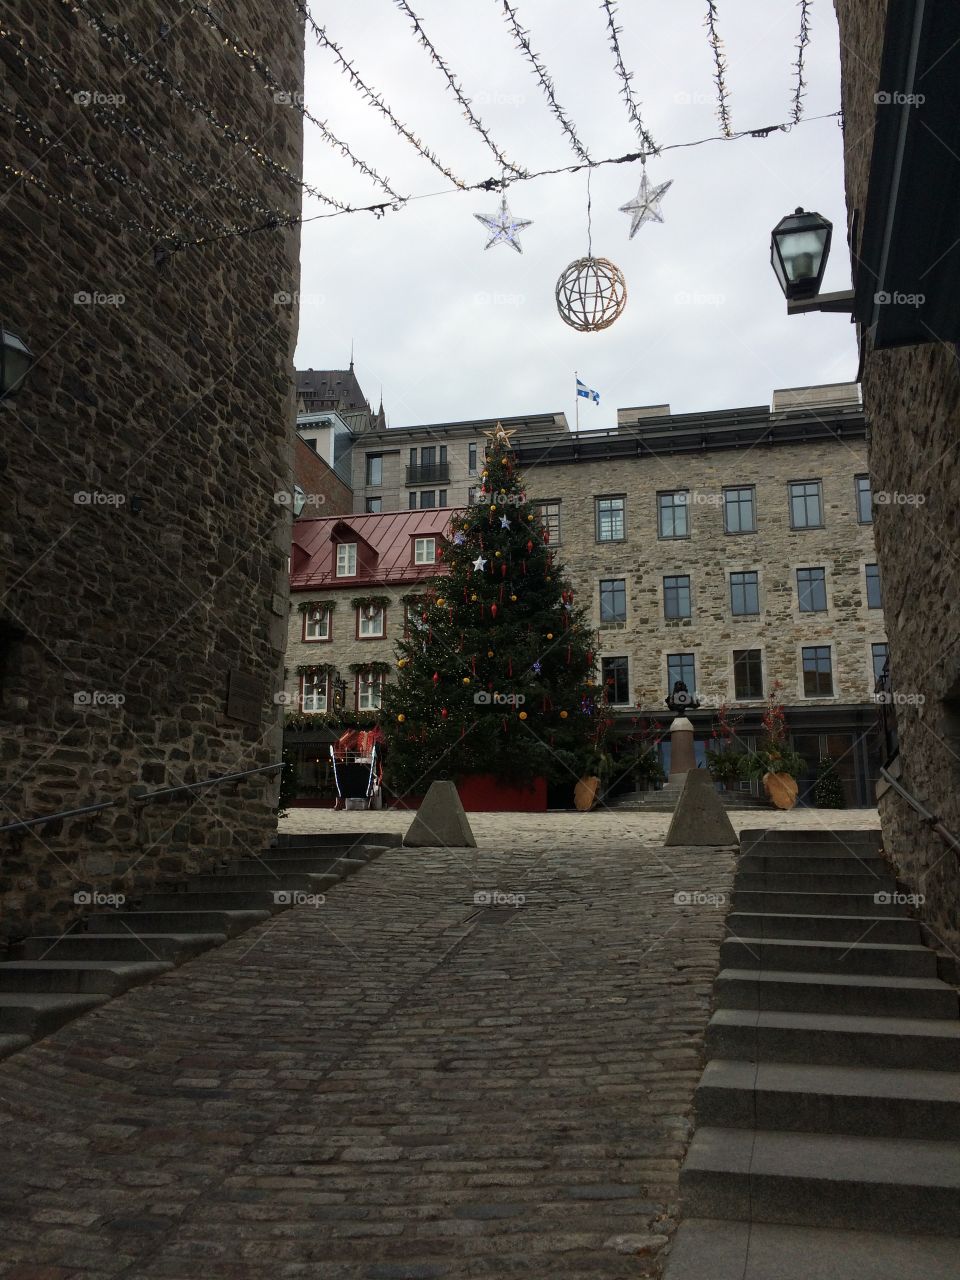 Christmas tree in the town square in Old Town Quebec 